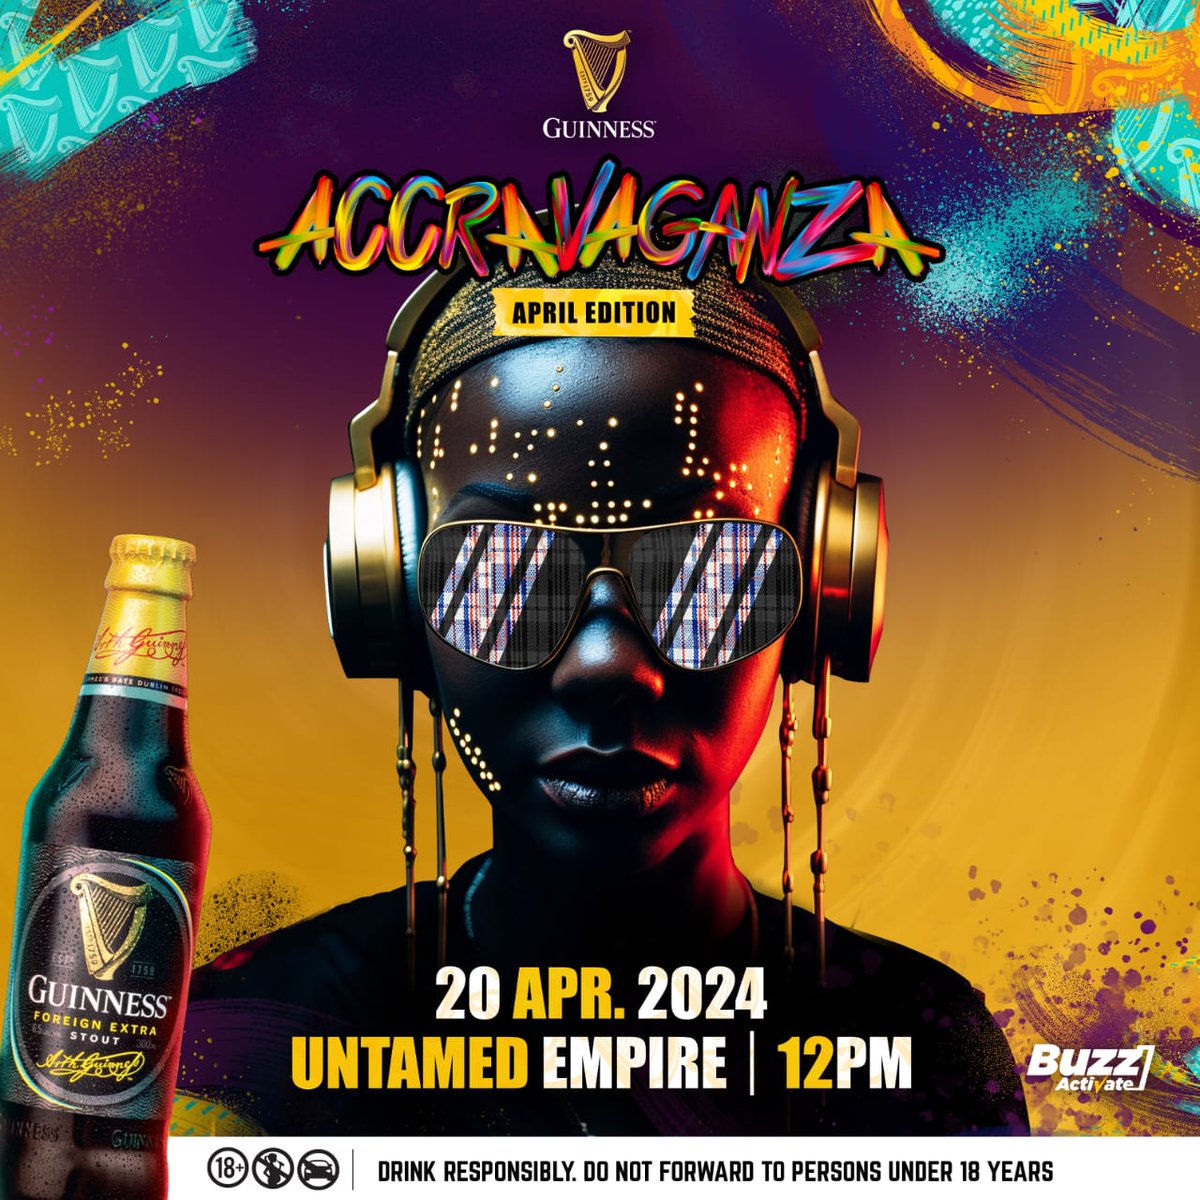 Don't miss out on the hottest event in town. Join us at Accravaganza this Saturday for an unforgettable time🔥 #GuinessAccravaganza